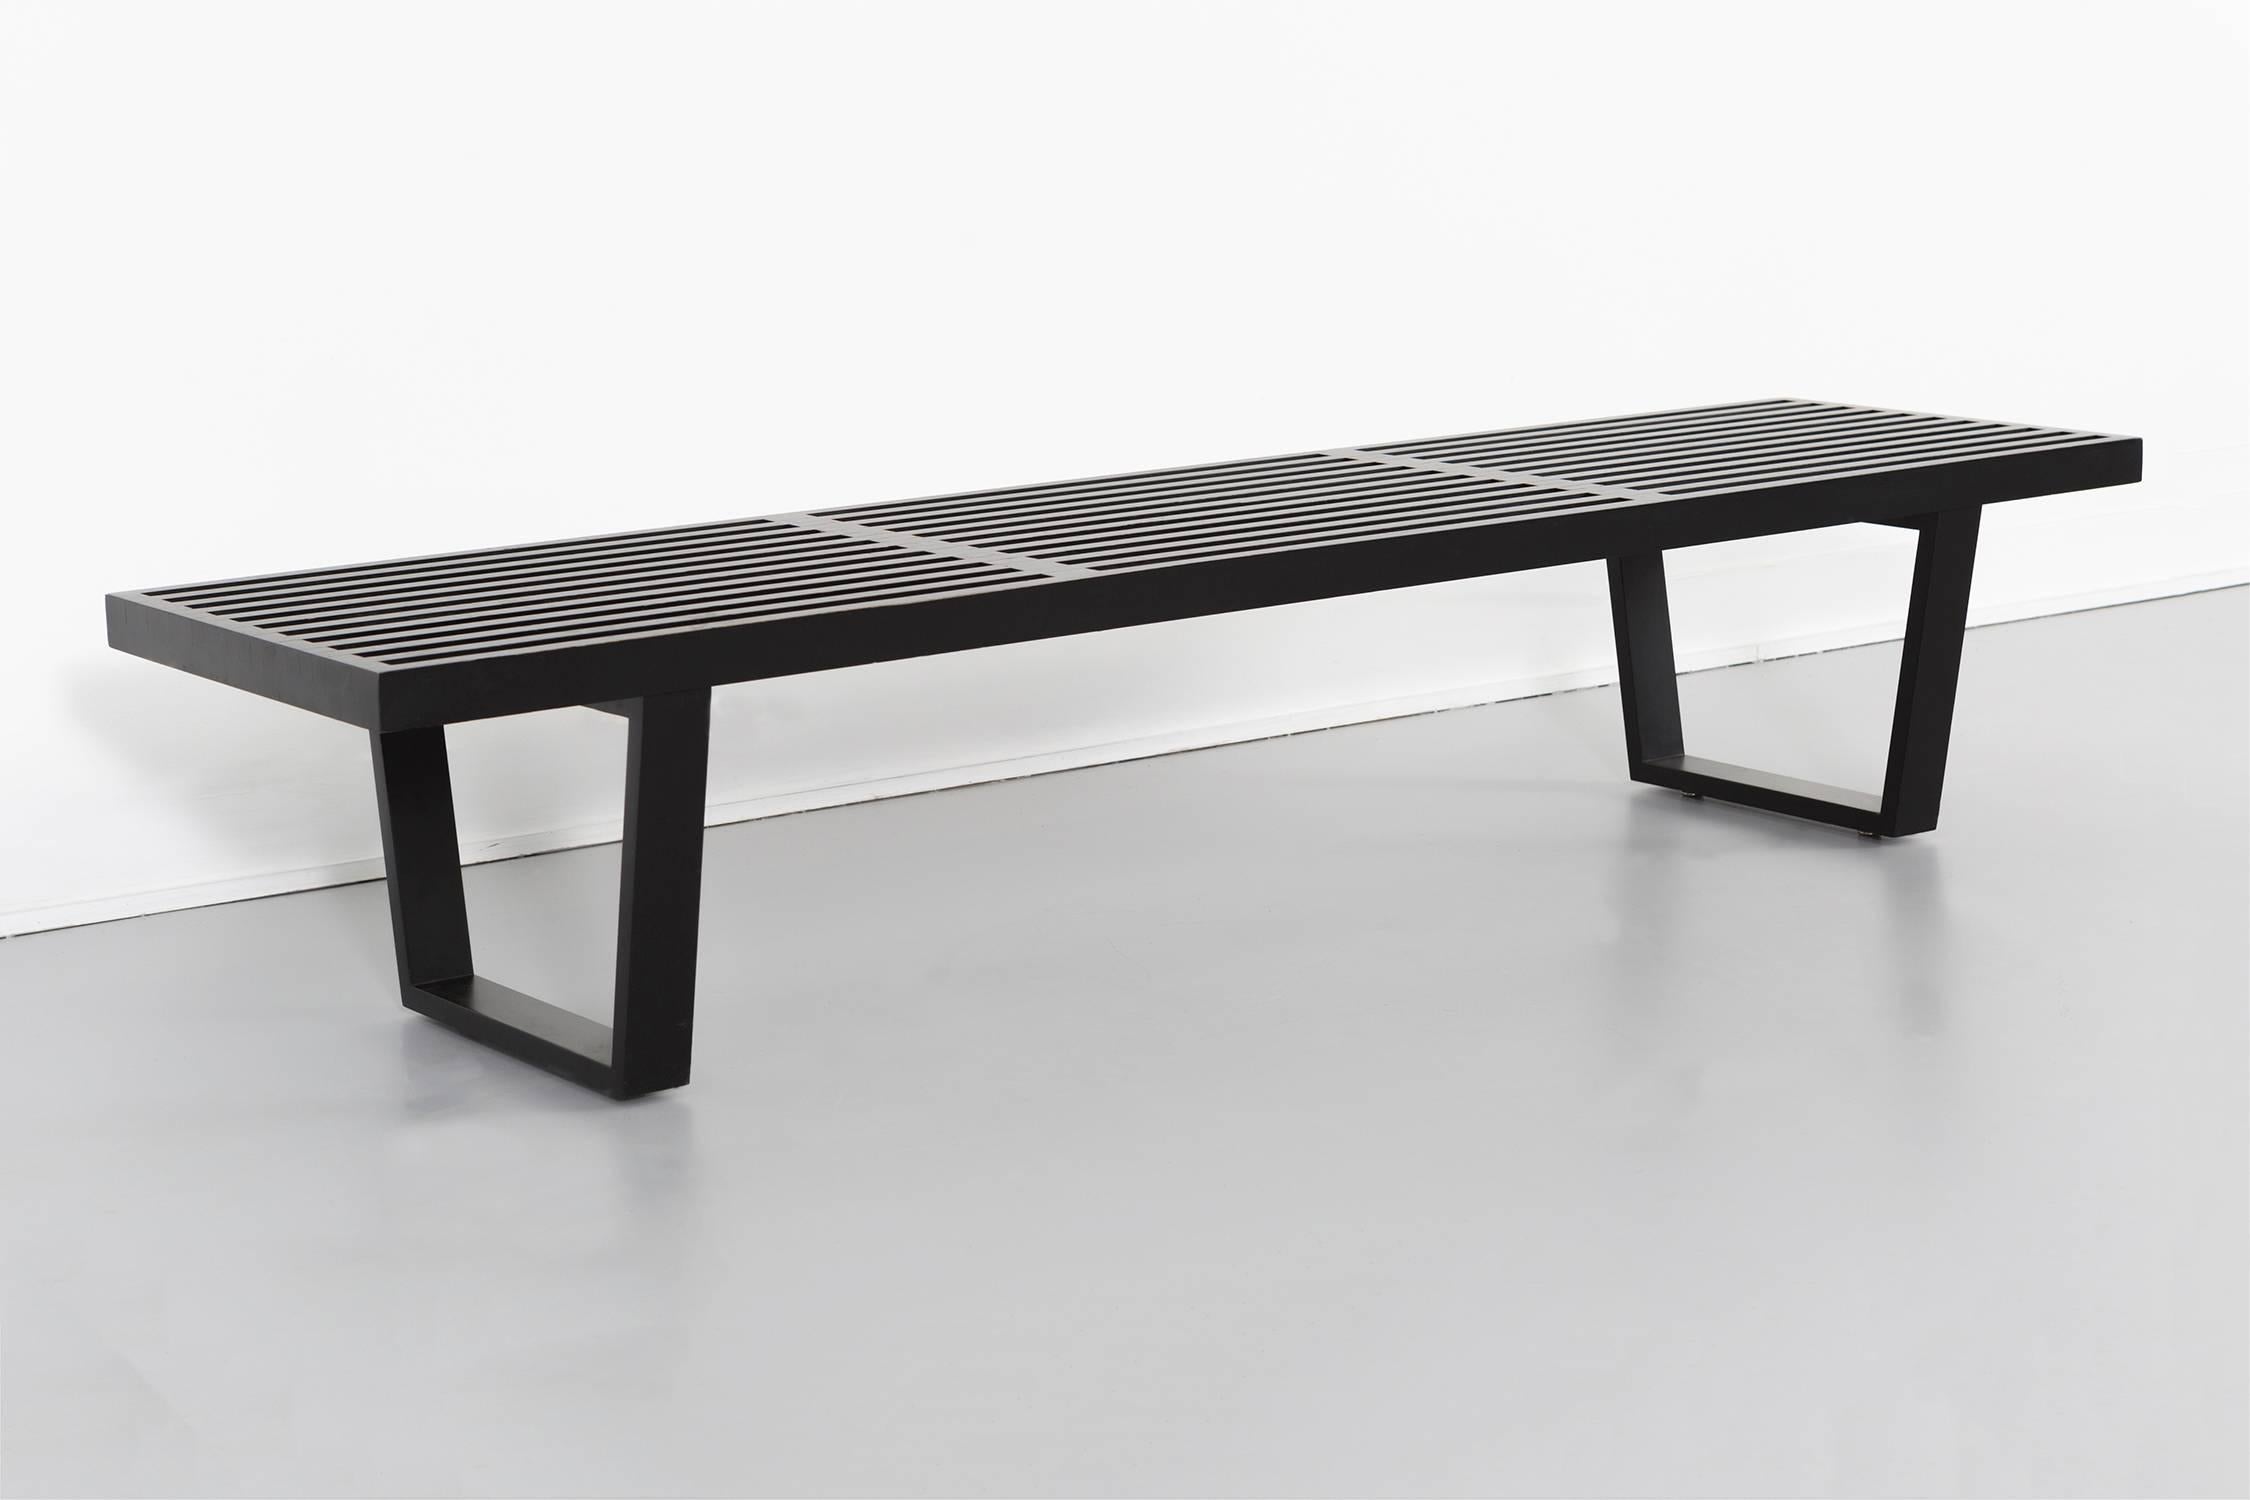 Bench

Designed by George Nelson for Herman Miller

USA, circa 1960s

Ebonized wood

Measures: 14” H x 72” W x 18 ½” D x seat 14” H.